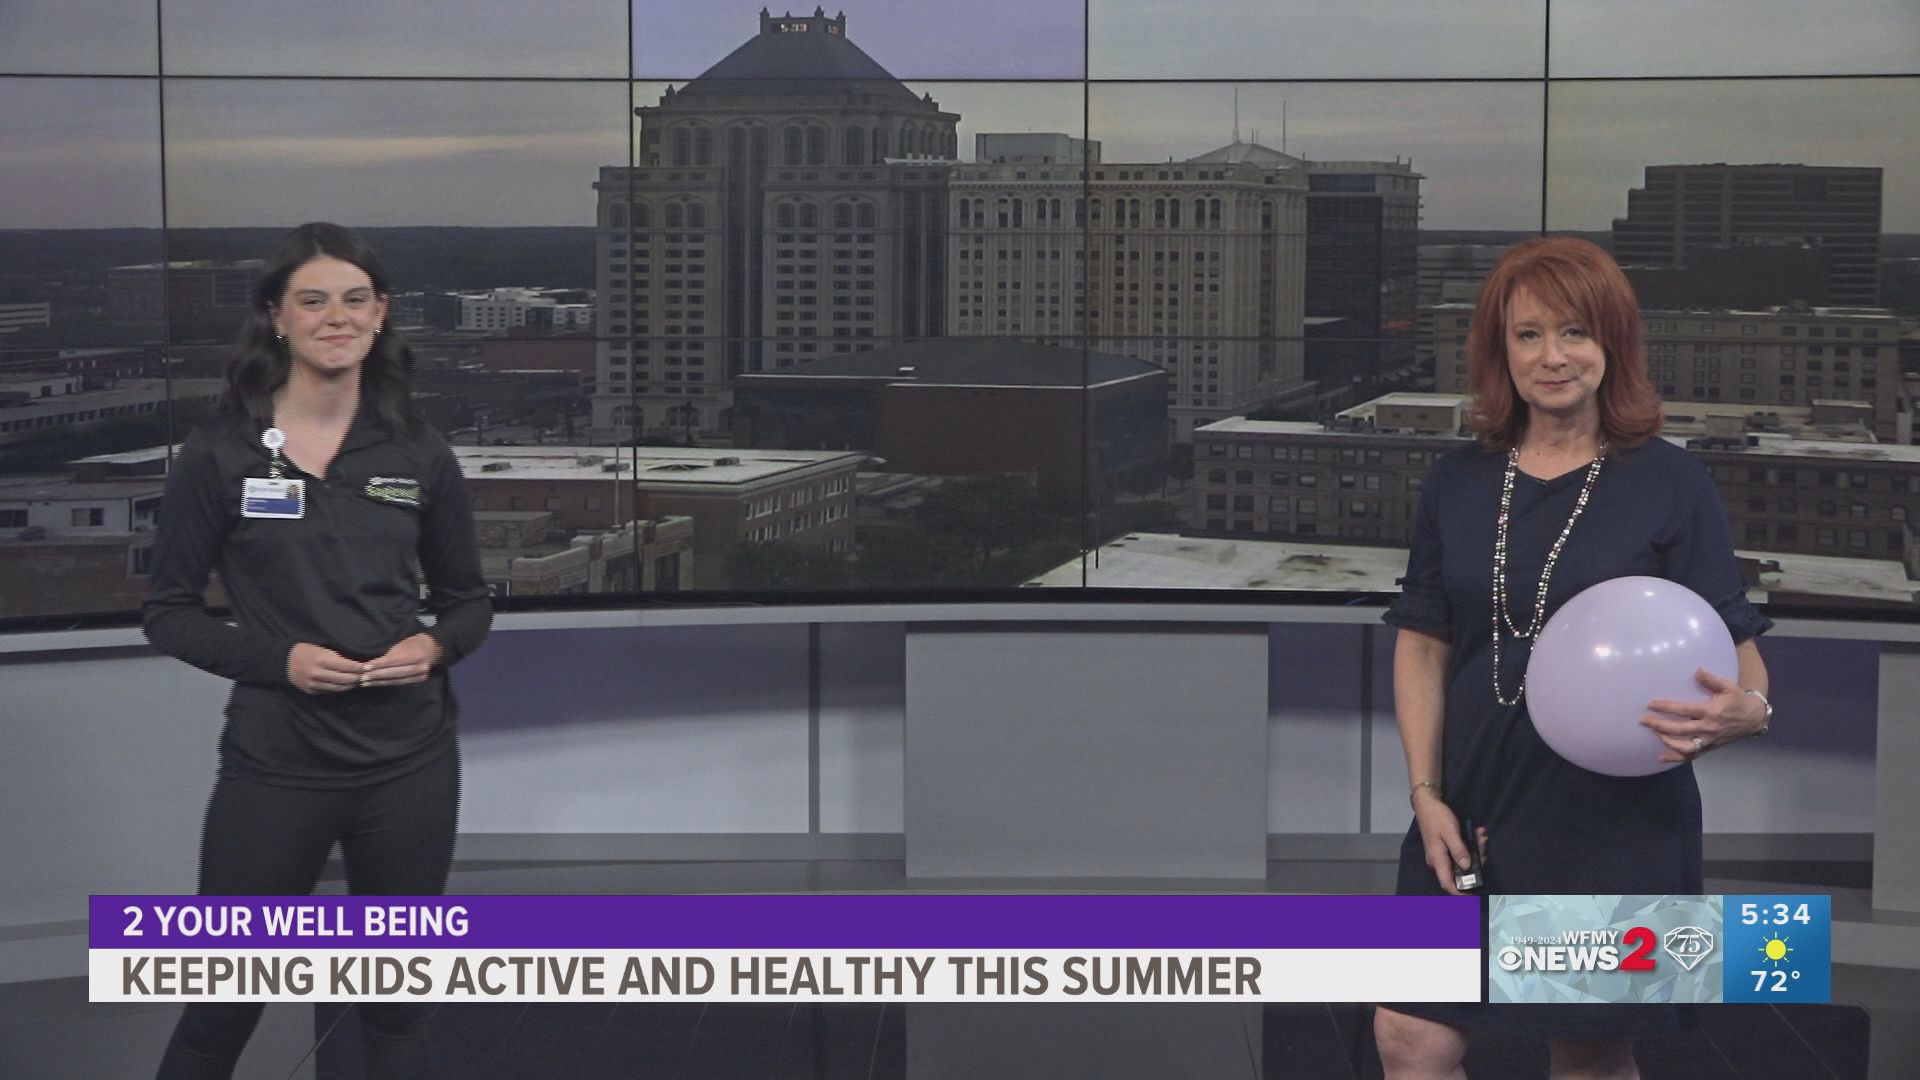 Cone Health's Play! Teacher shares ways to keep your kids moving this summer while building skills.